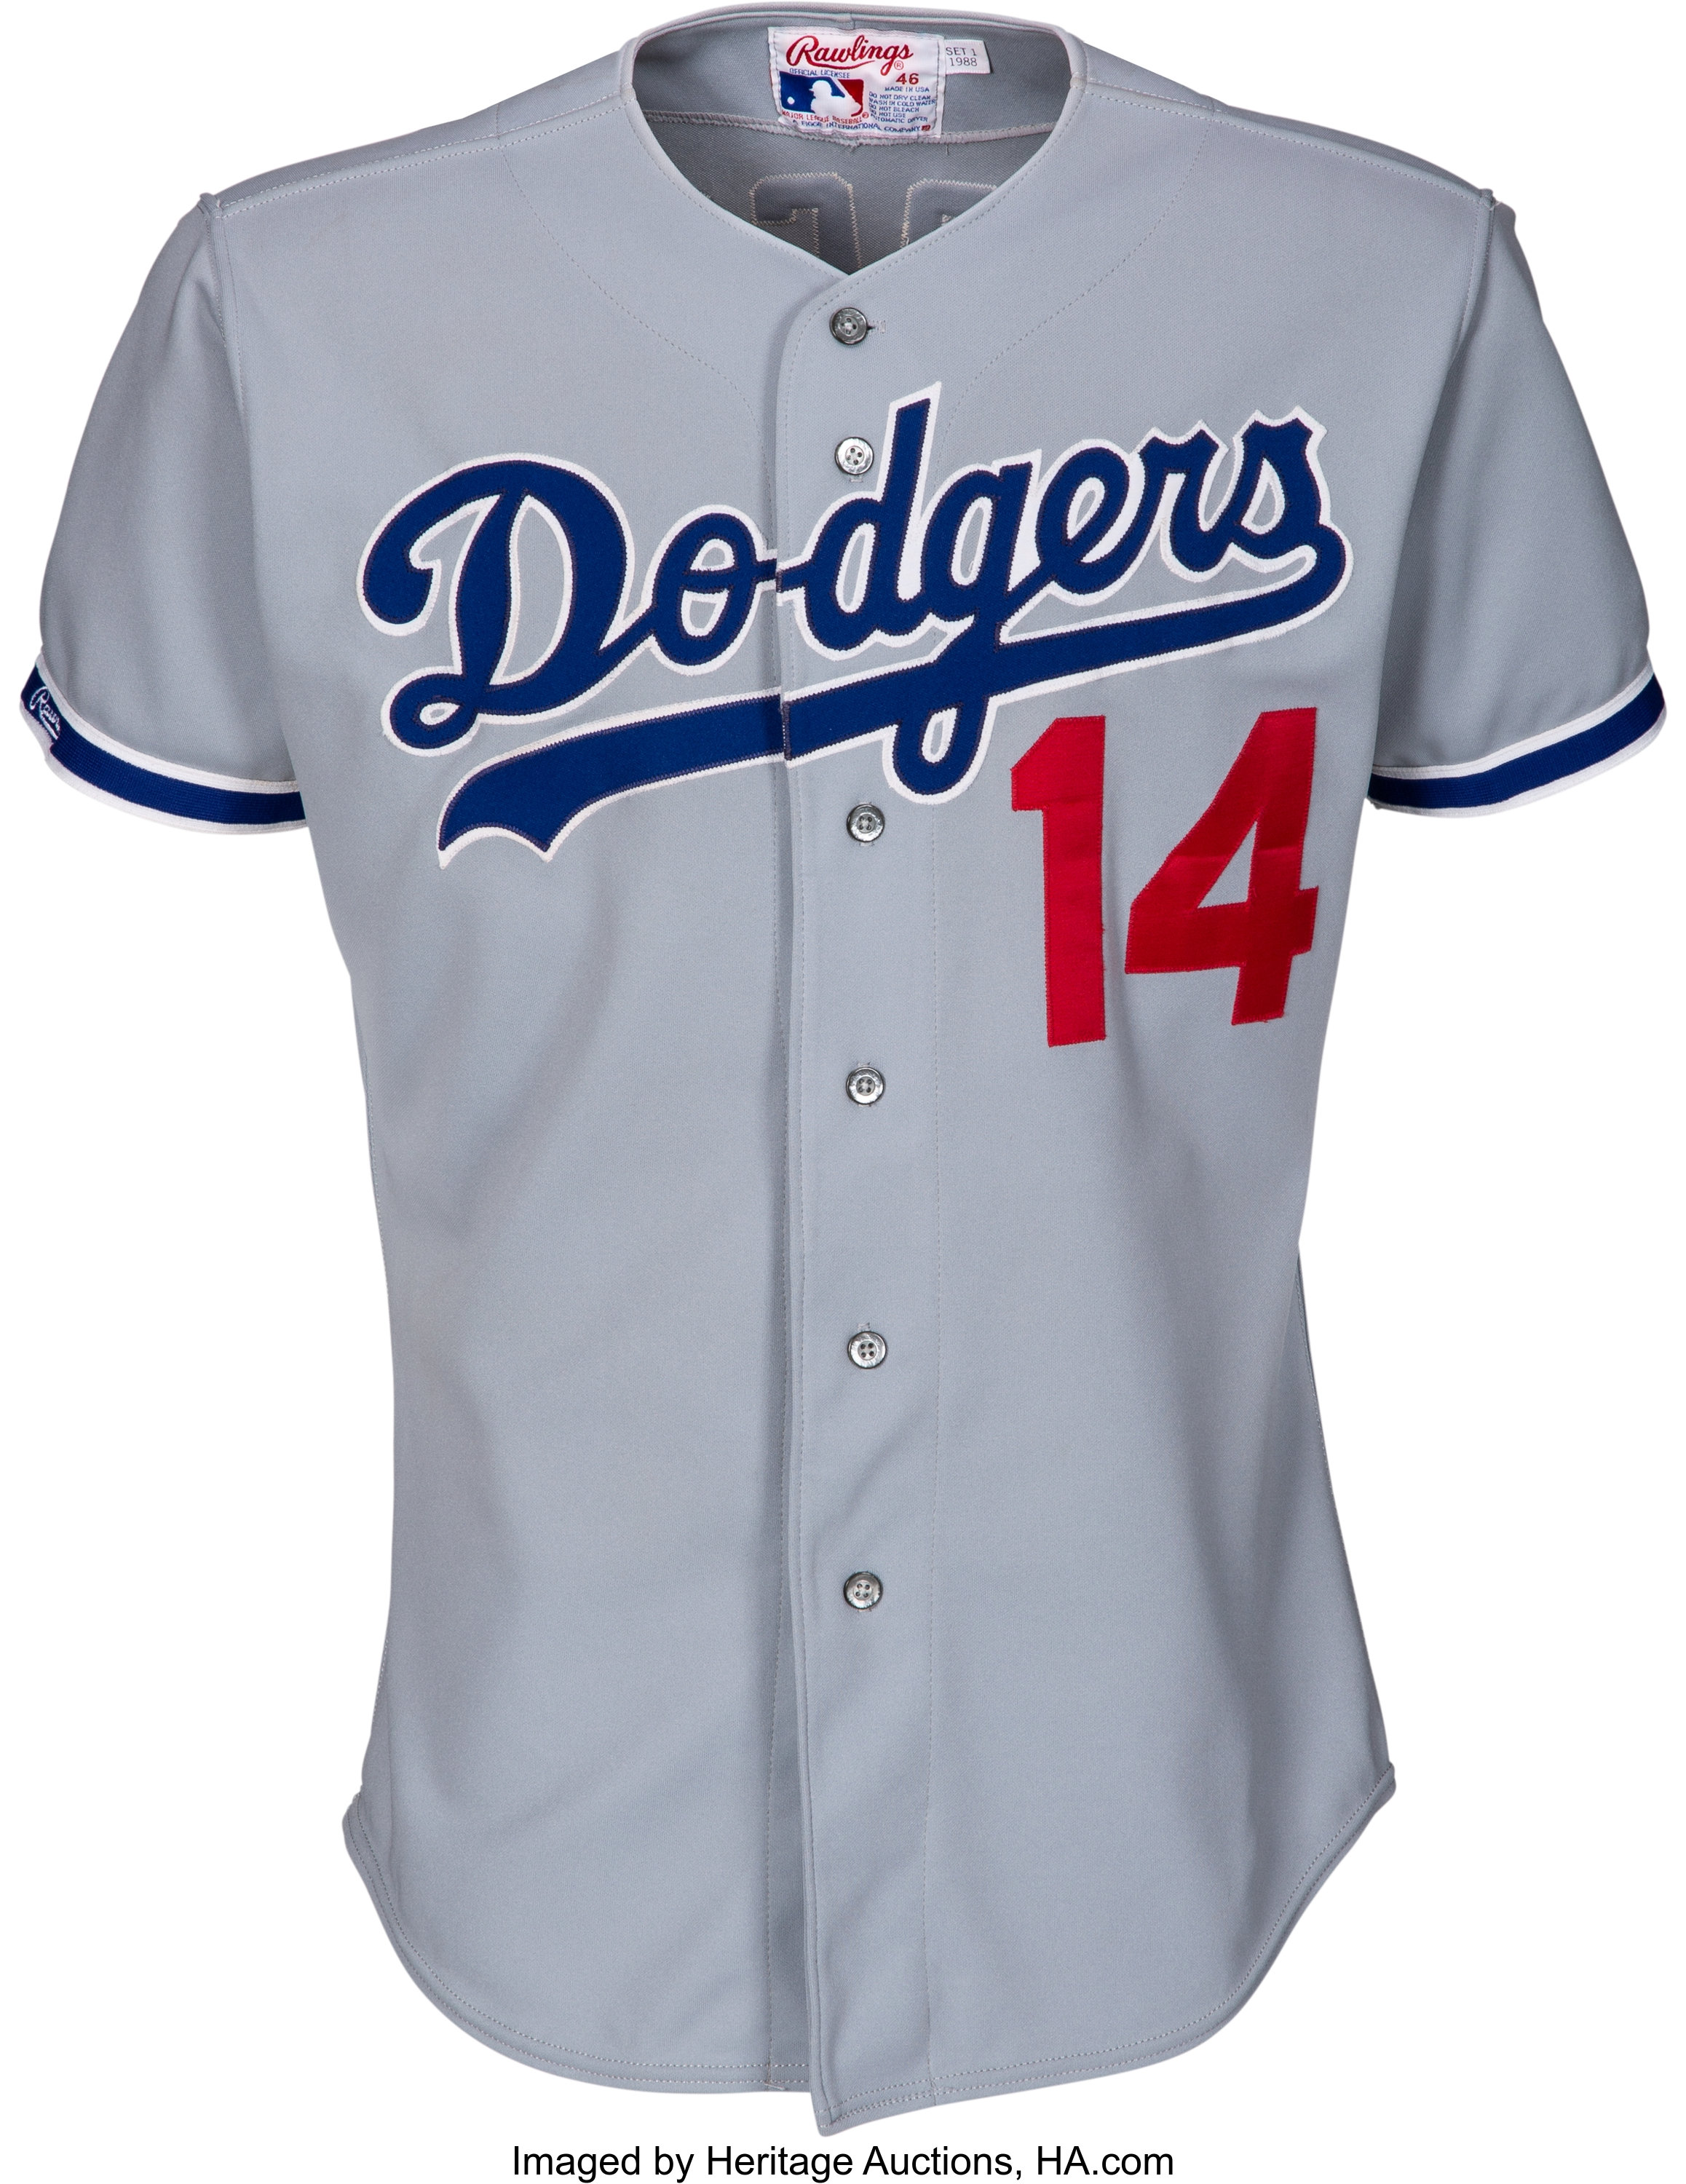 1988 Mike Scioscia Game Worn Los Angeles Dodgers Jersey.